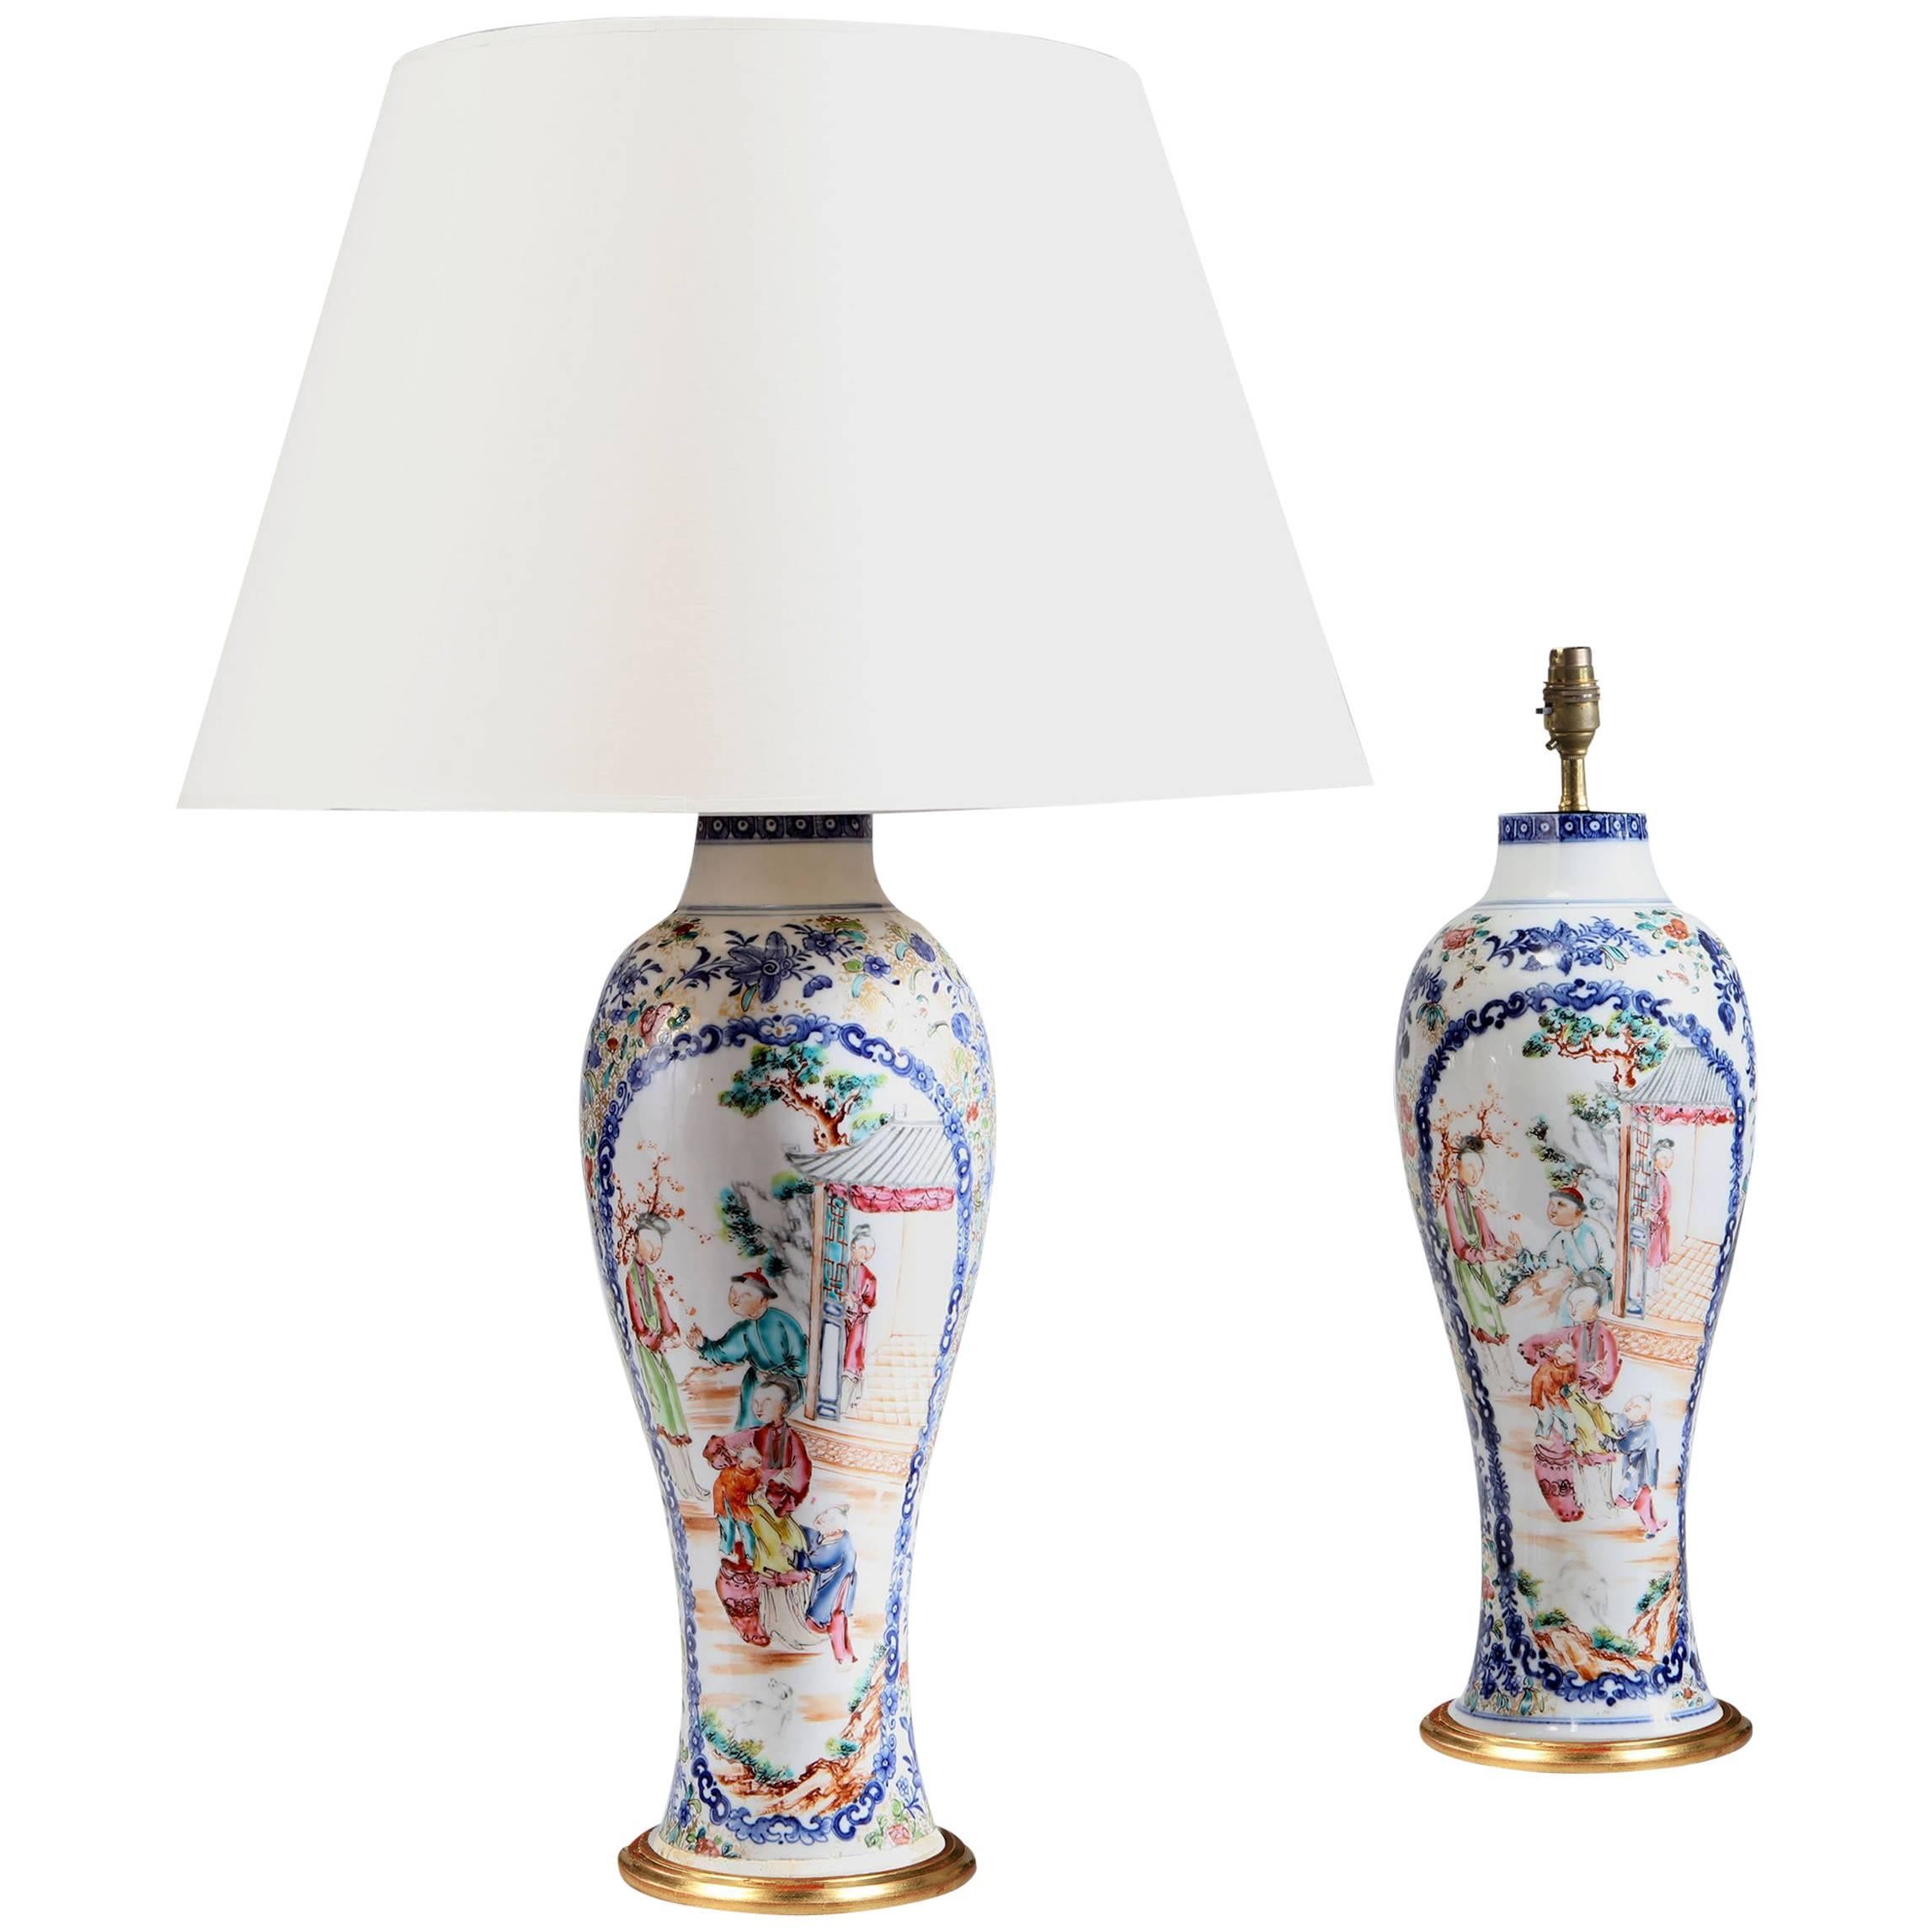 A Pair of 18th Century Chinese Porcelain Vases as Table Lamps with Gilt Bases For Sale